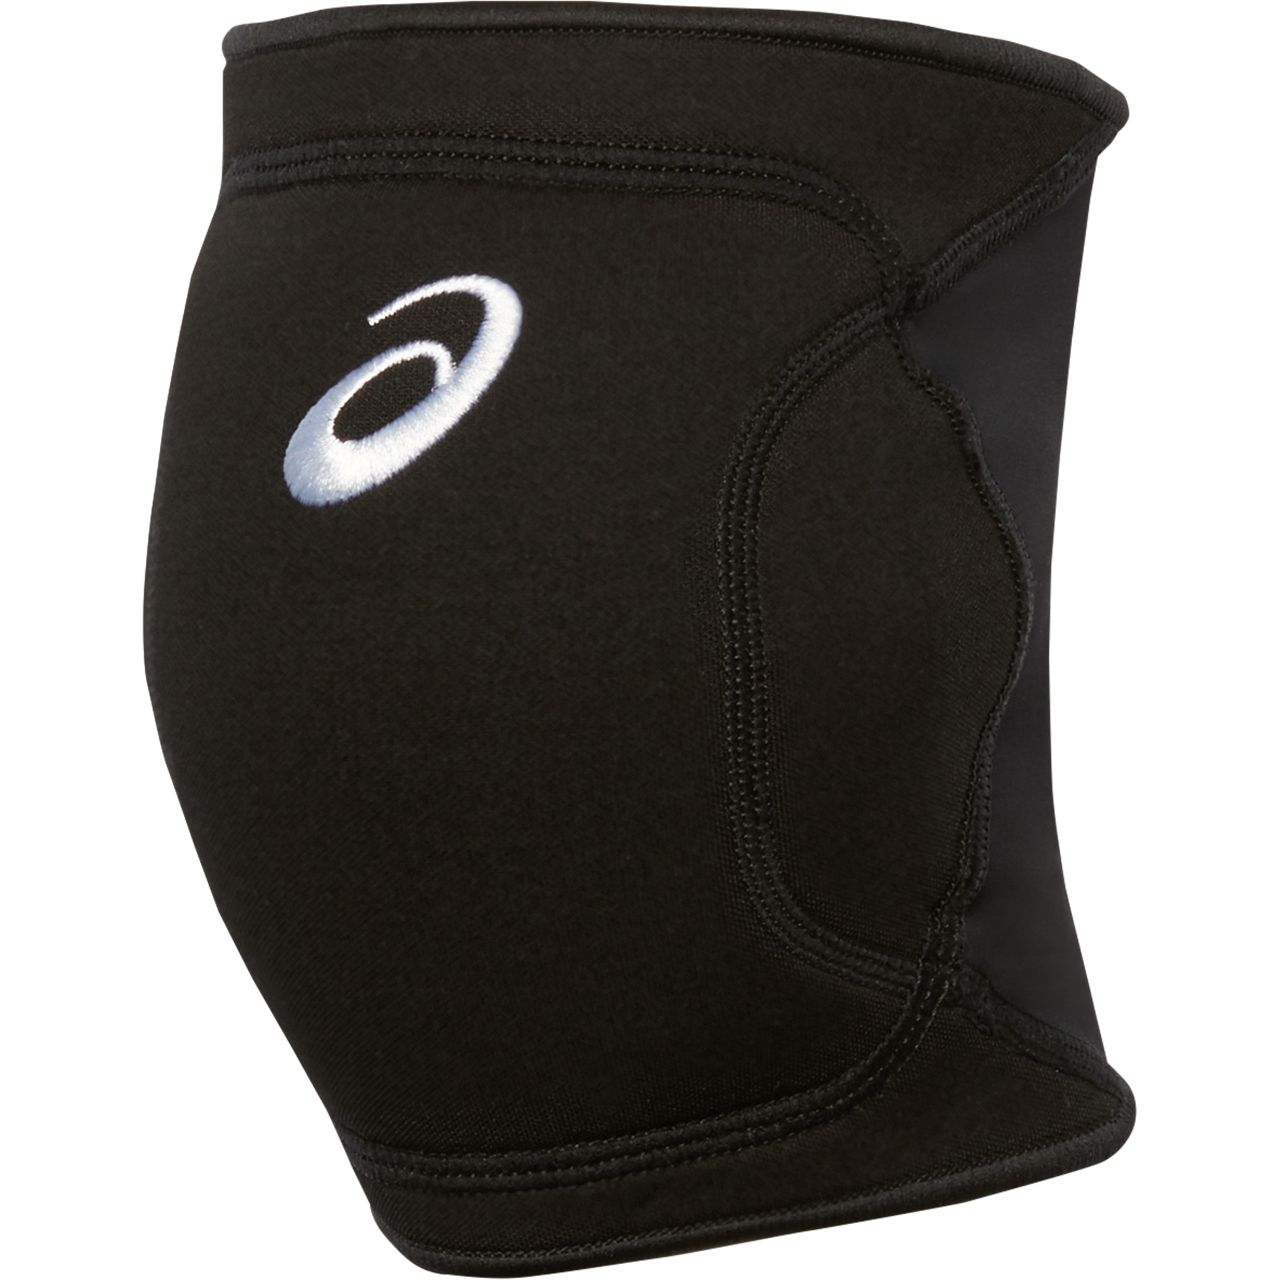 Asics Gel-Conform 2 Kneepads | Real Volleyball